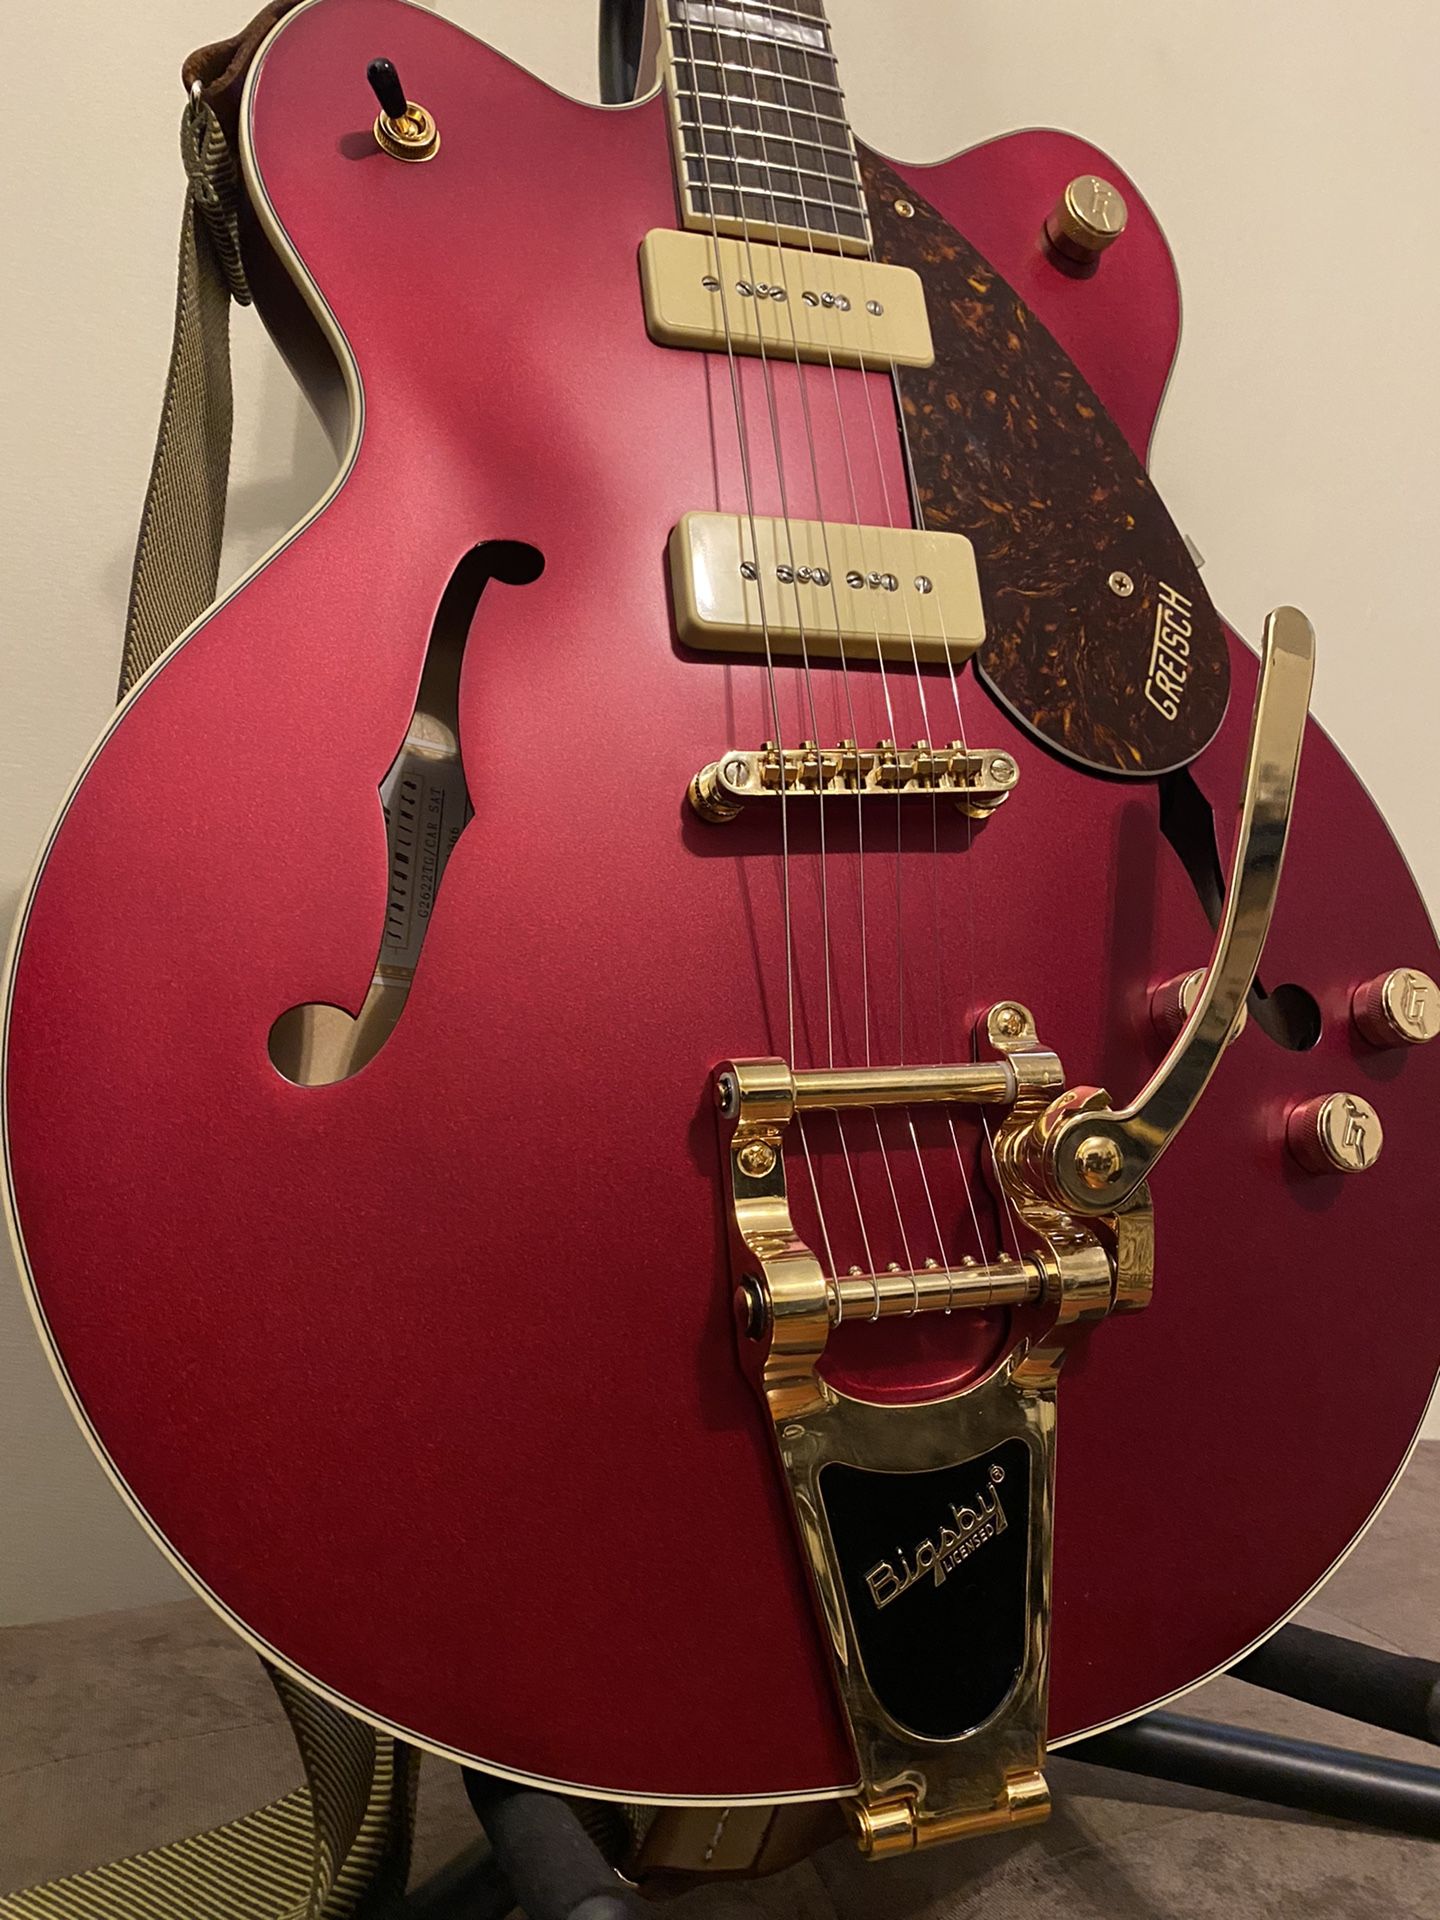 Gretsch G2622tg Limited Edition P90 Semi hollow Electric Guitar